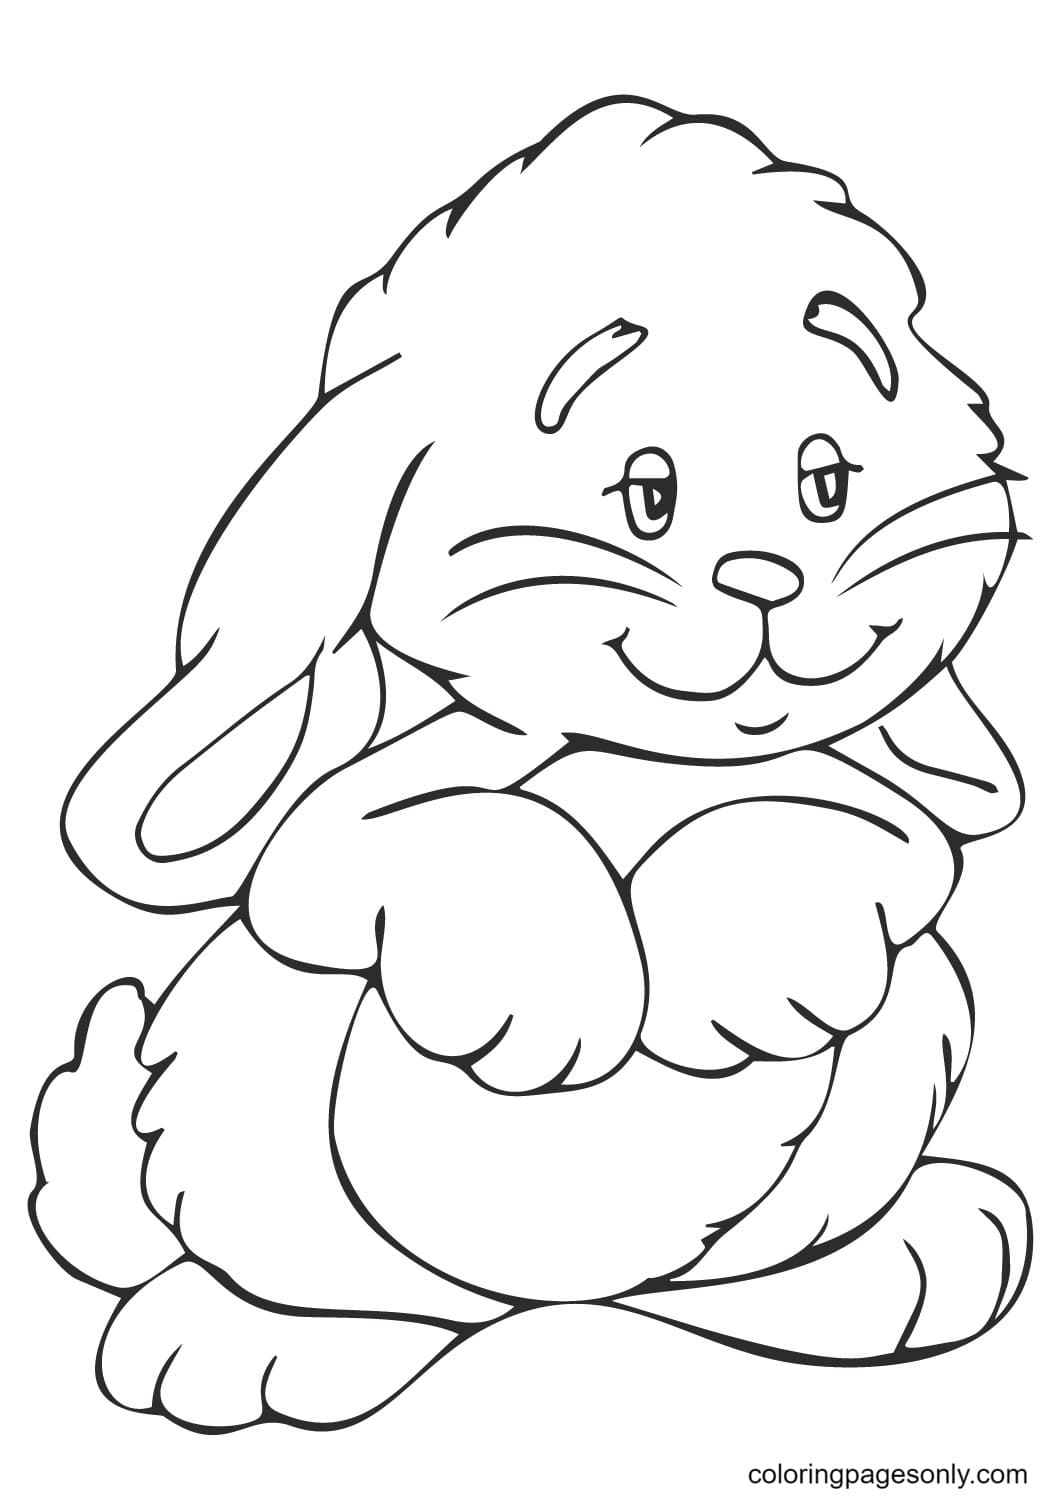 Lovely Bunnies Coloring Pages